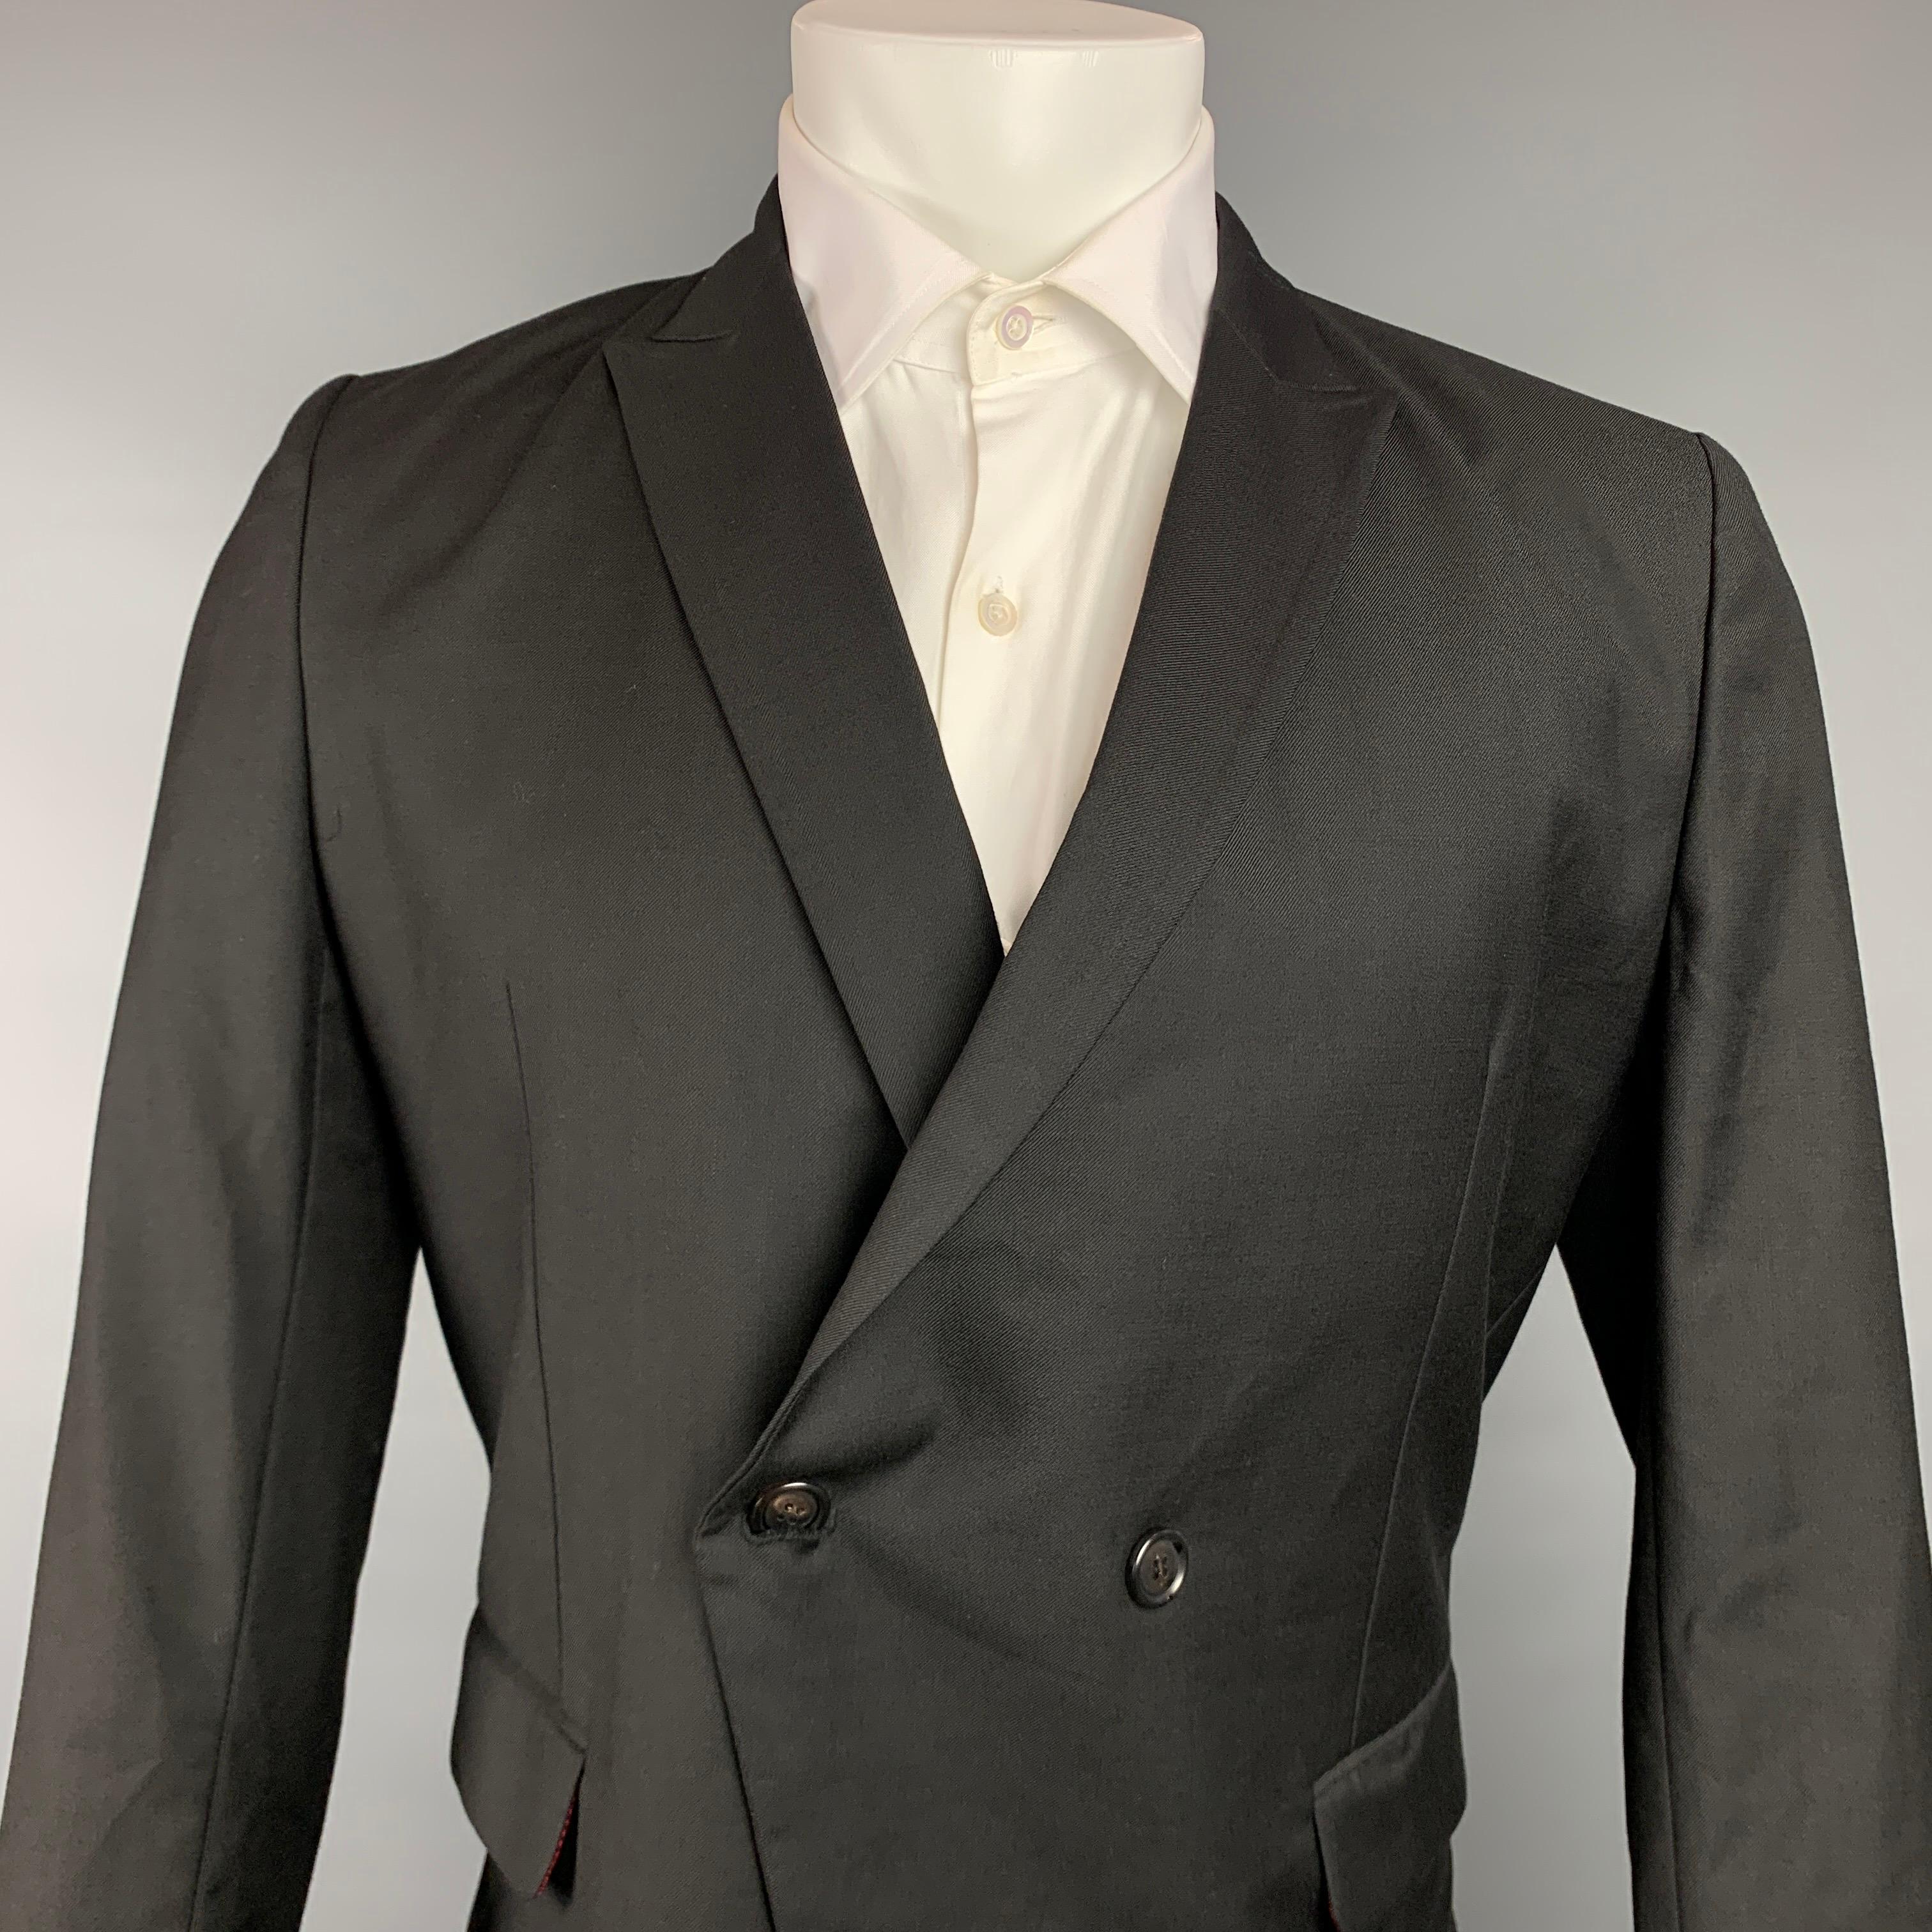 KRIS VAN ASSCHE sport coat comes in a black wool with a full liner featuring a peak lapel, flap pockets, and a double breasted closure. Made in Italy.

Very Good Pre-Owned Condition.
Marked: 48

Measurements:

Shoulder: 17 in.
Chest: 38 in.
Sleeve: